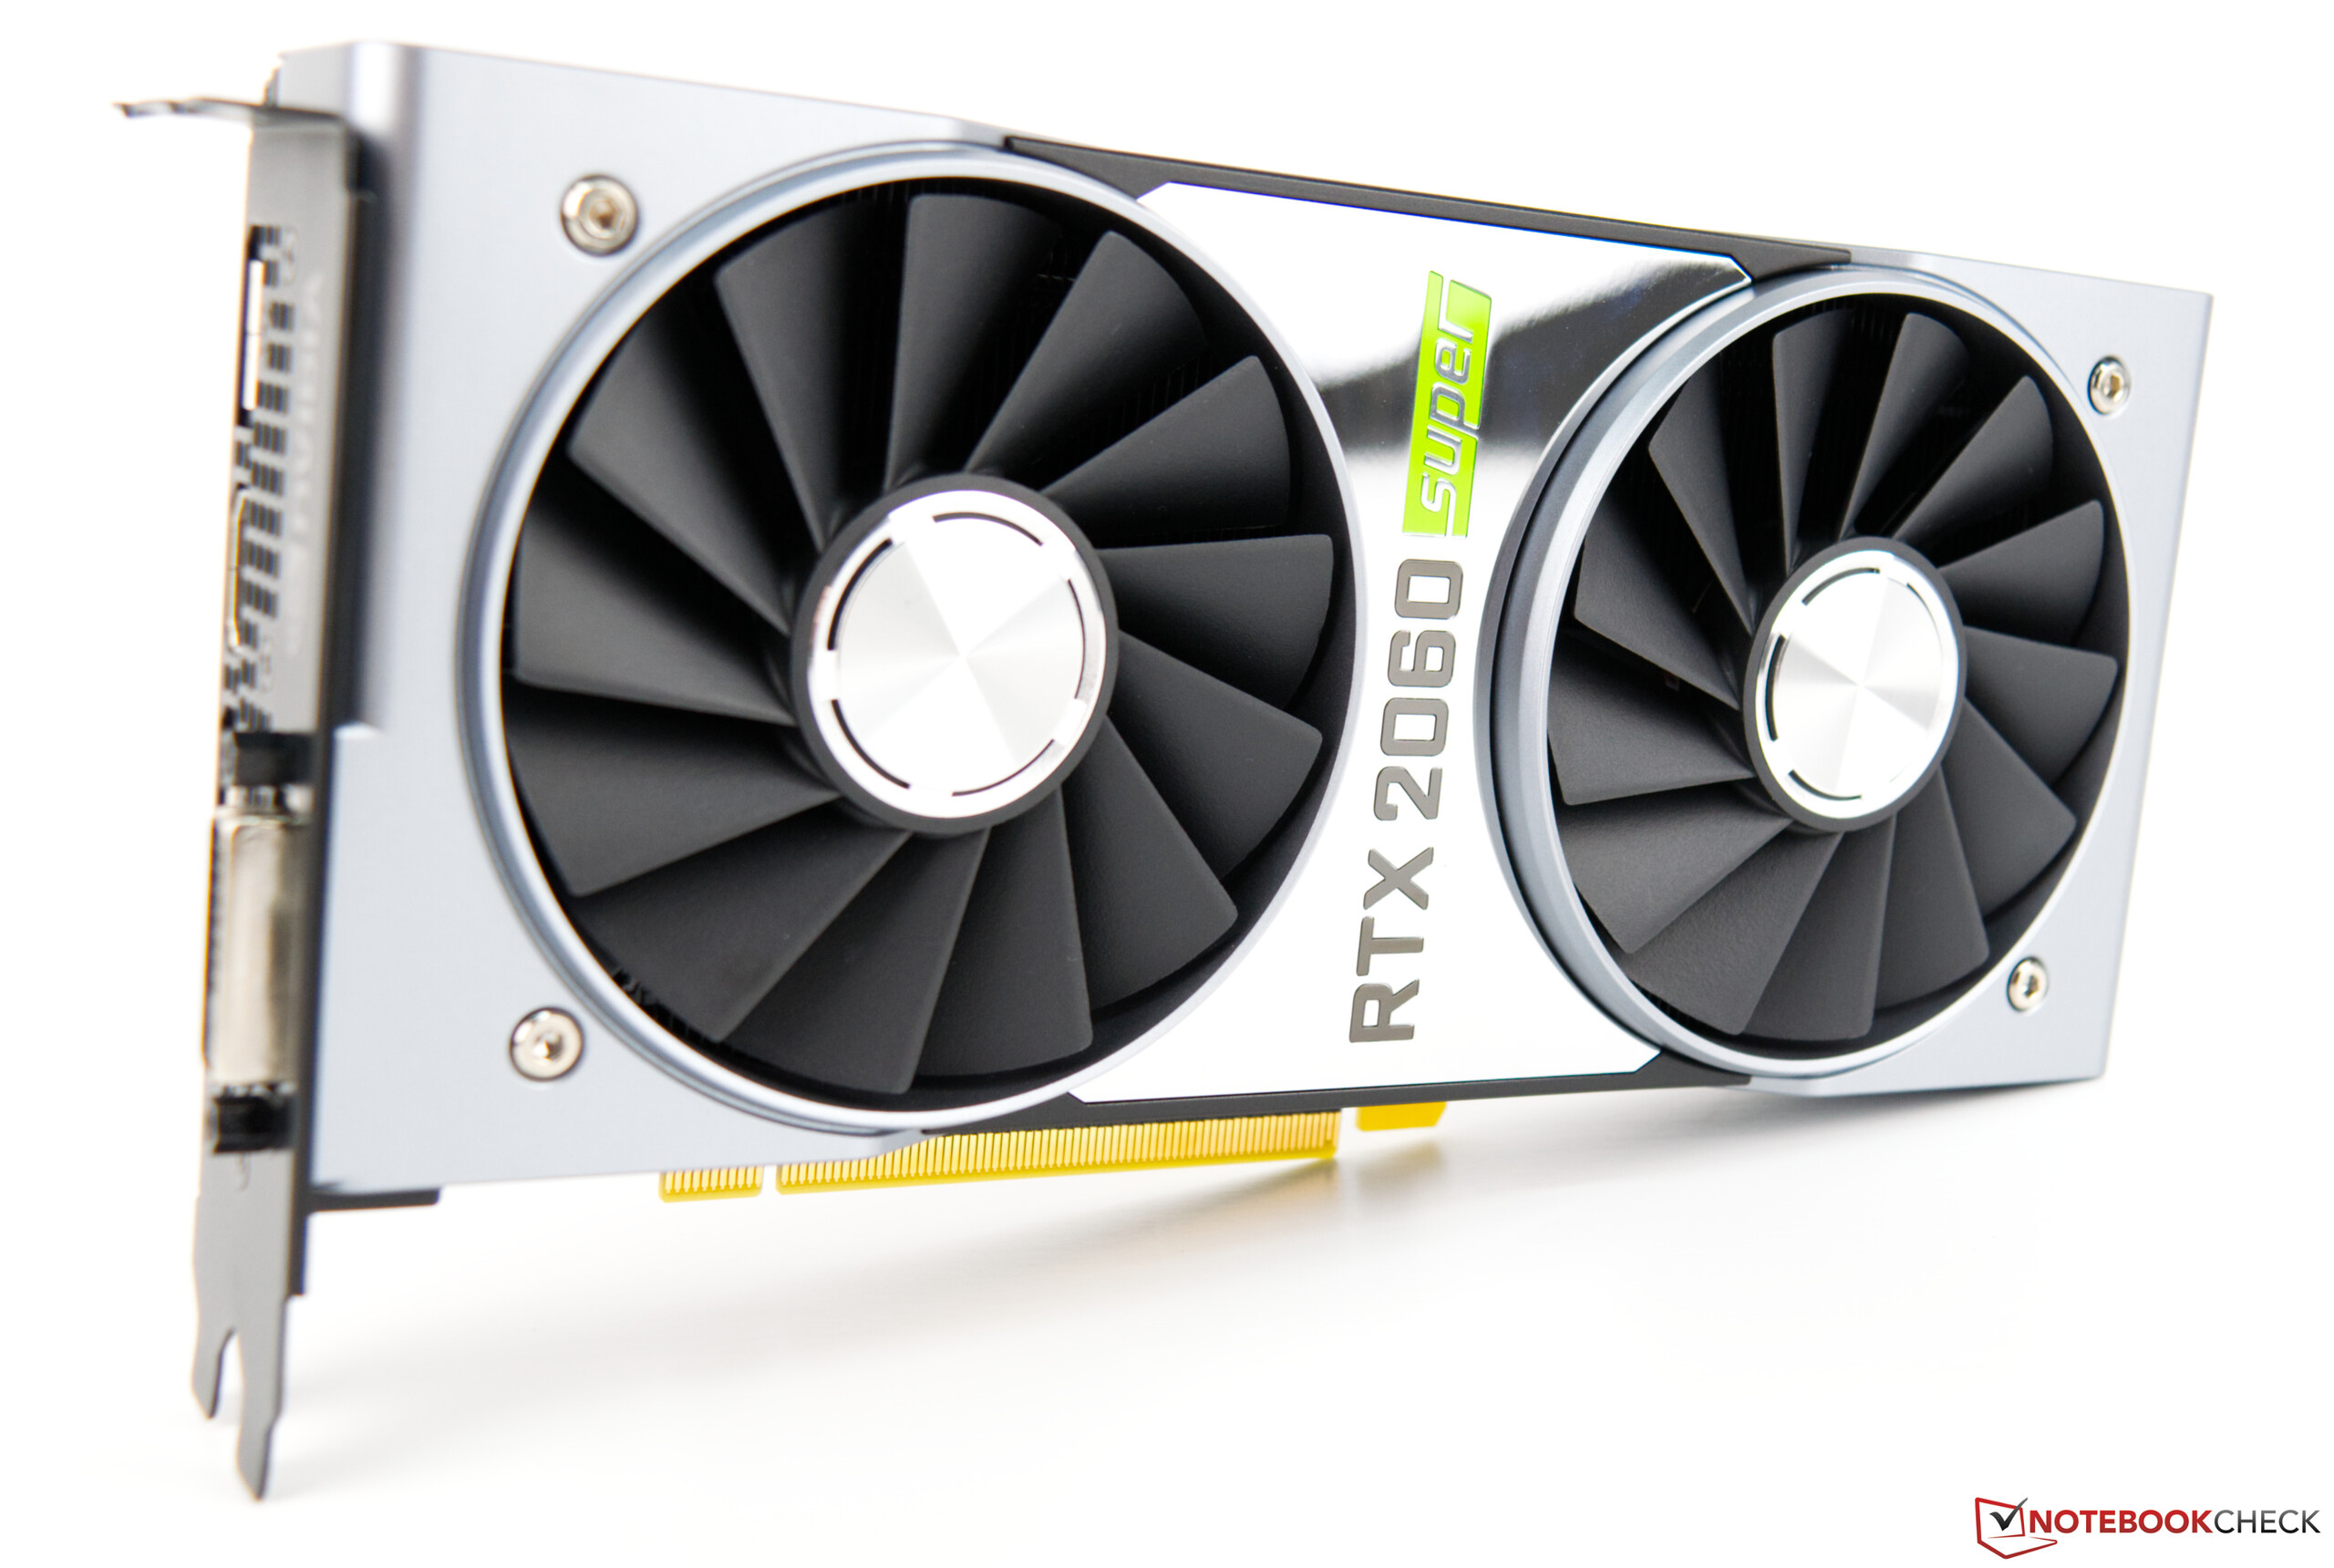 Nvidia GeForce RTX 2060 Super Review: The entry-level GPU finally